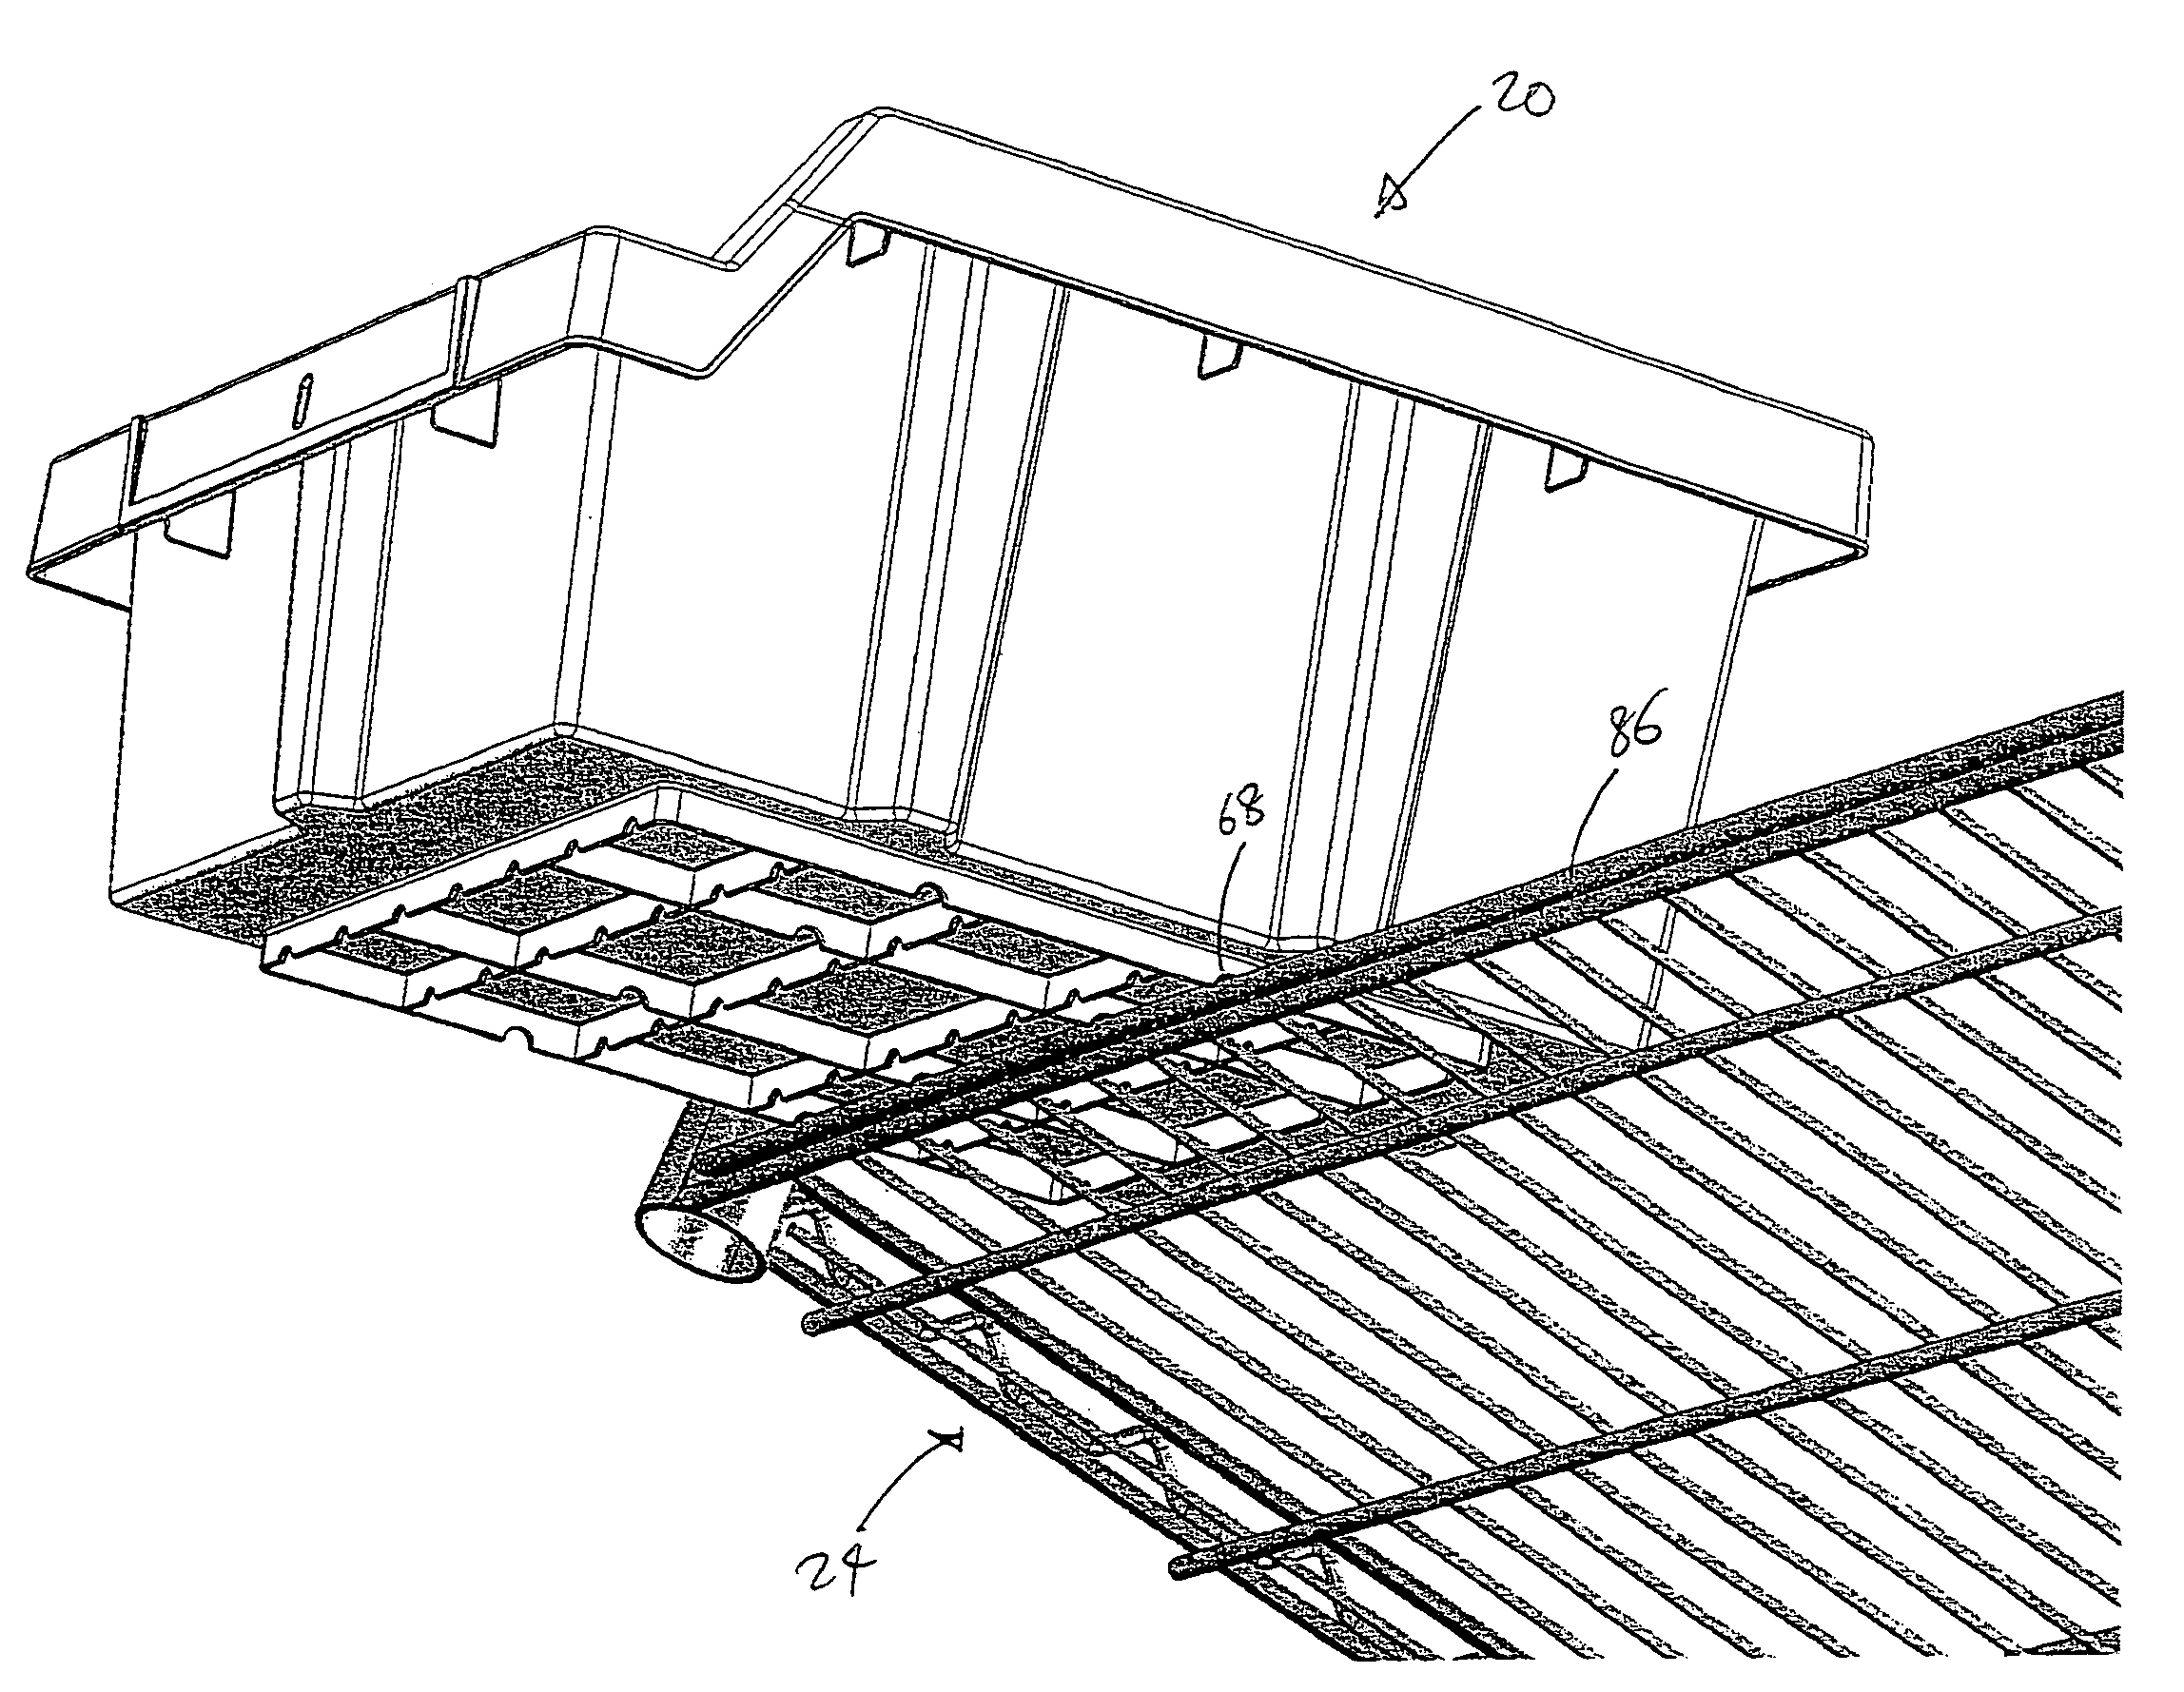 Storage bin for use with shelving system